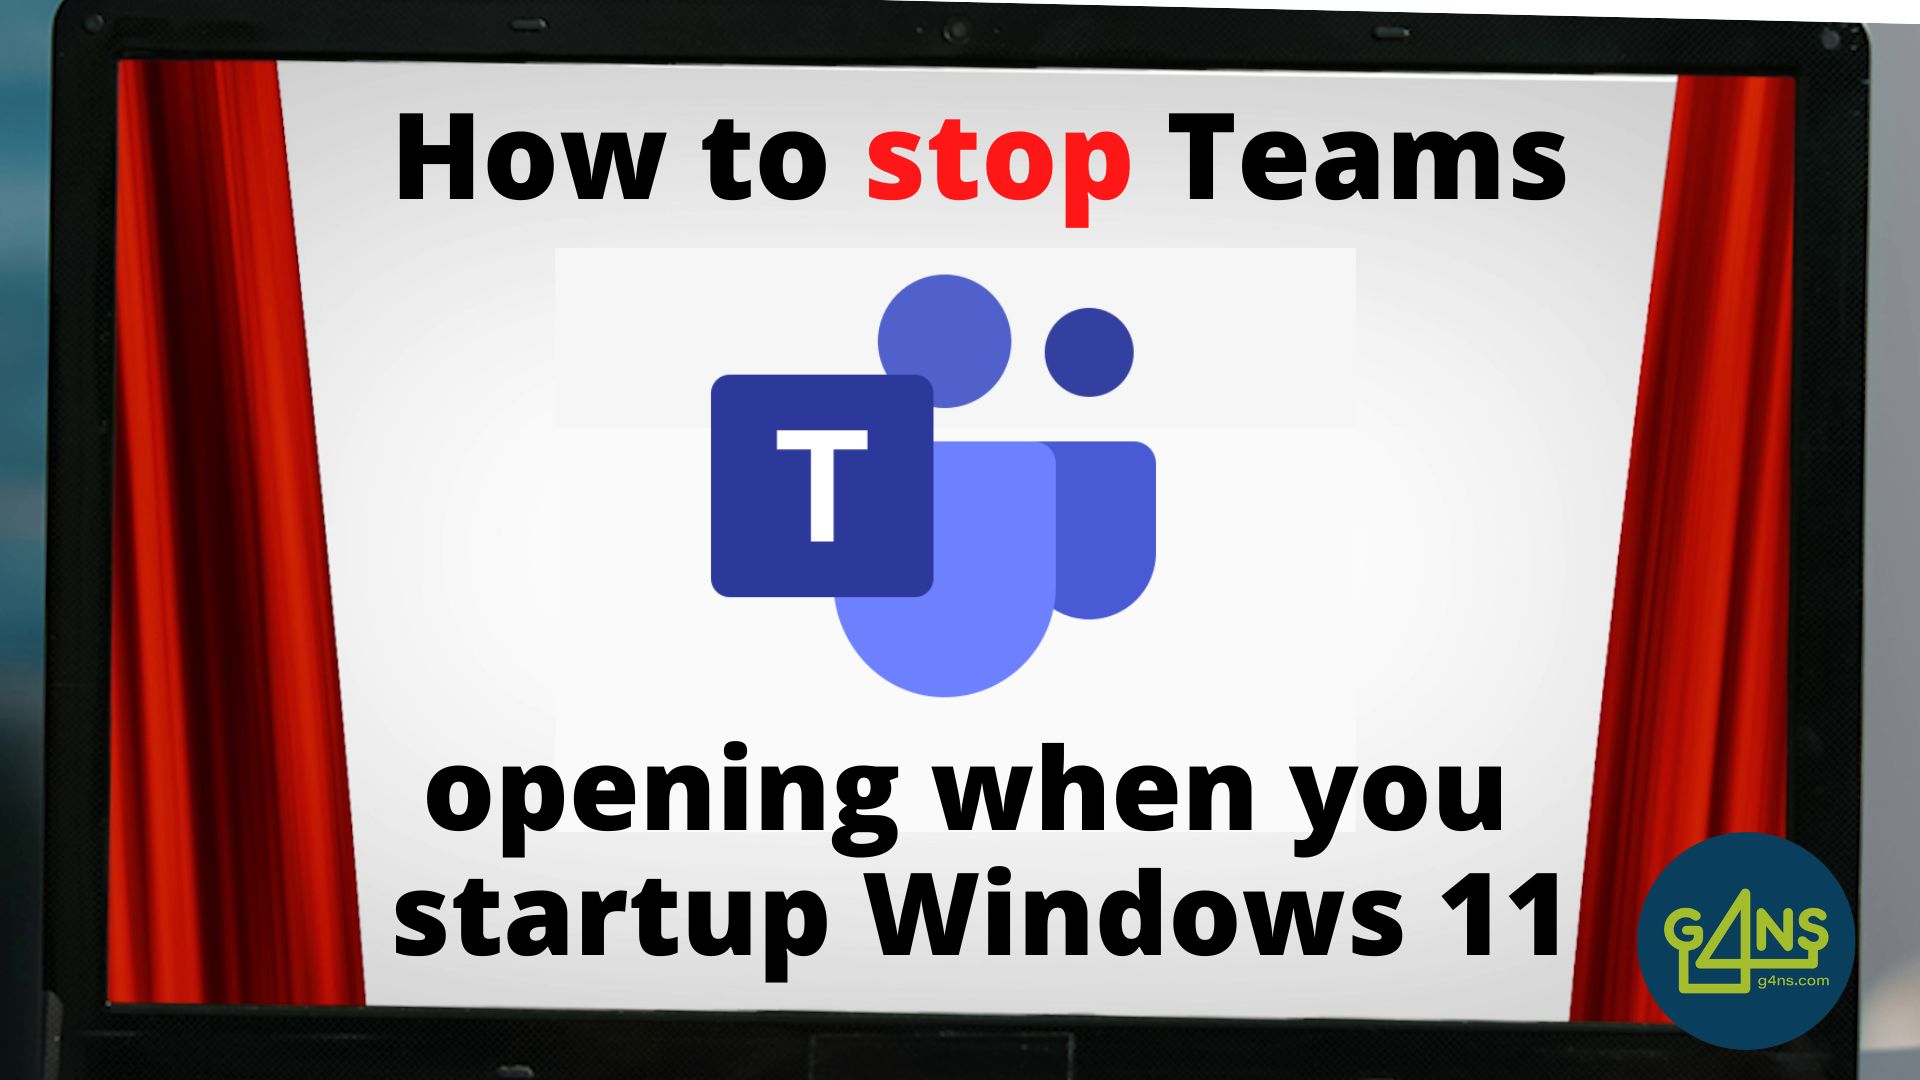 How to stop Teams opening when you startup Windows 11